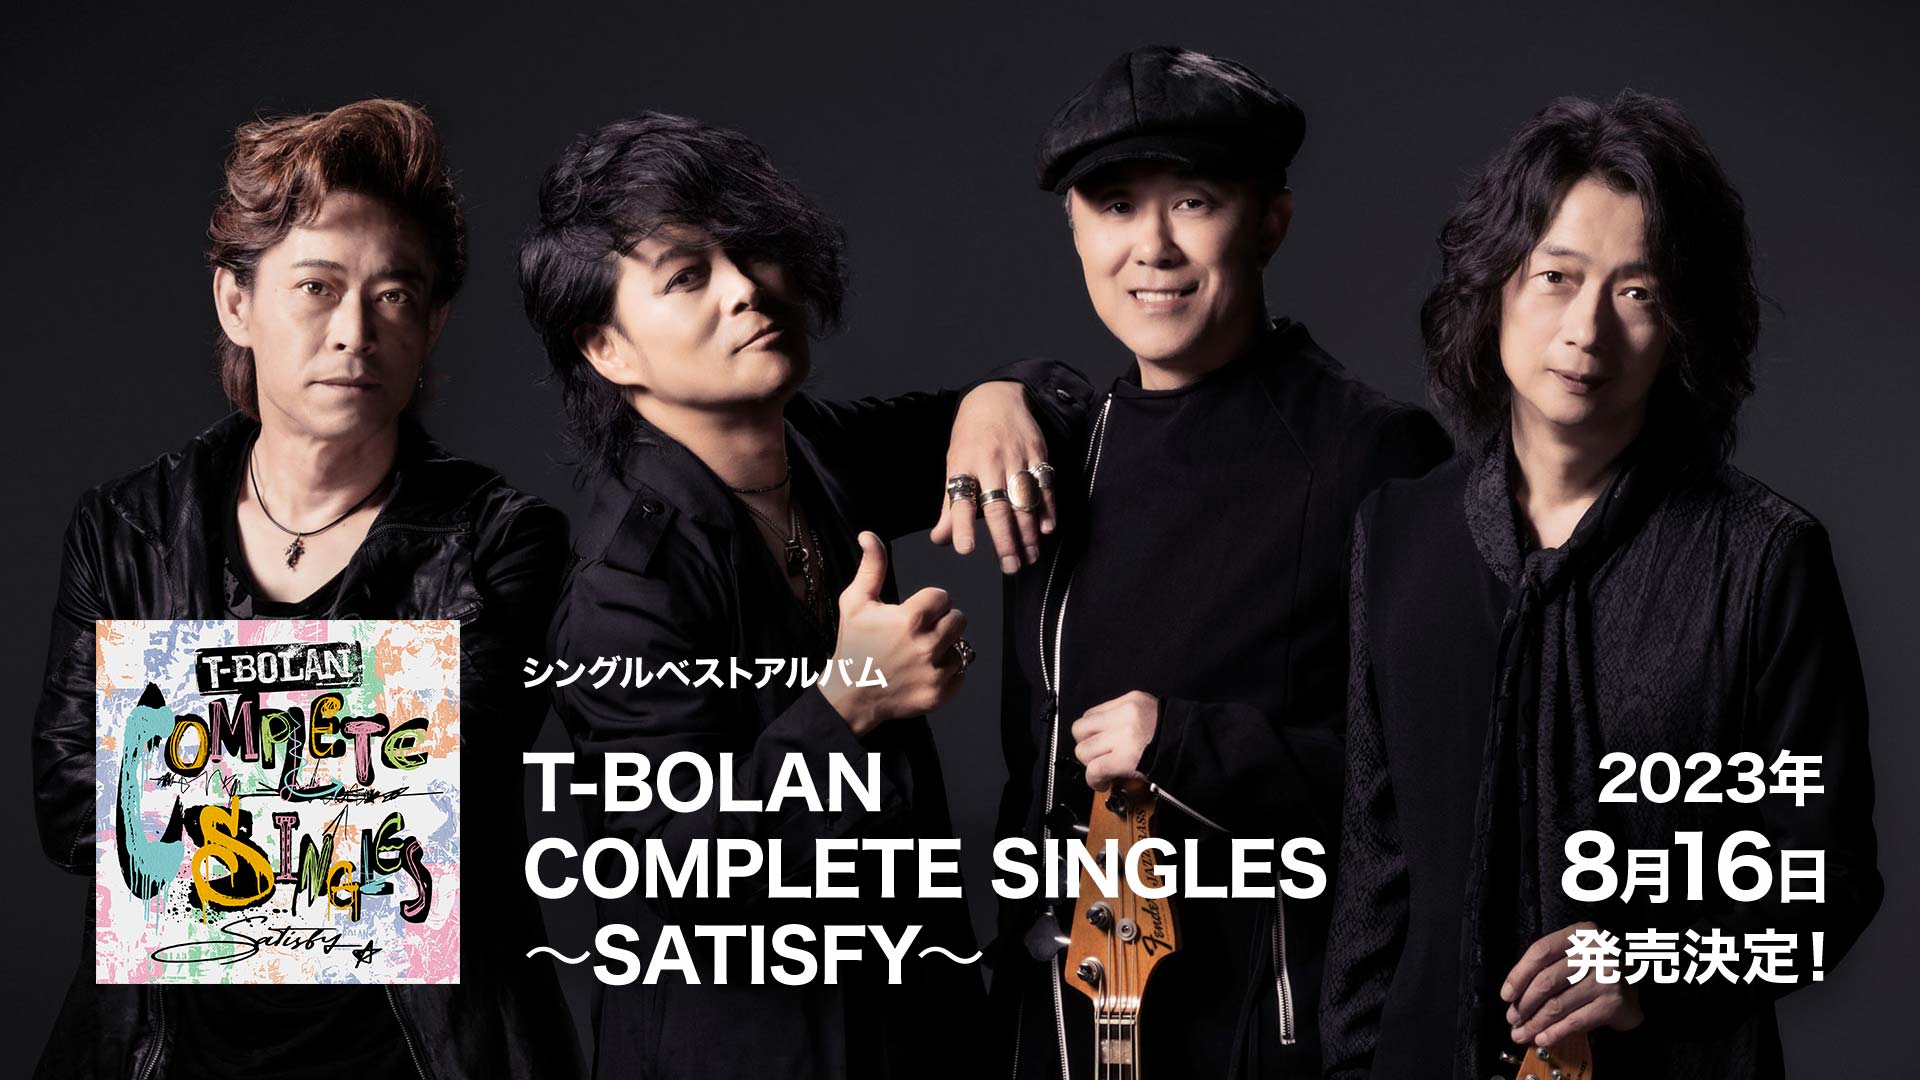 T-BOLAN Official Website